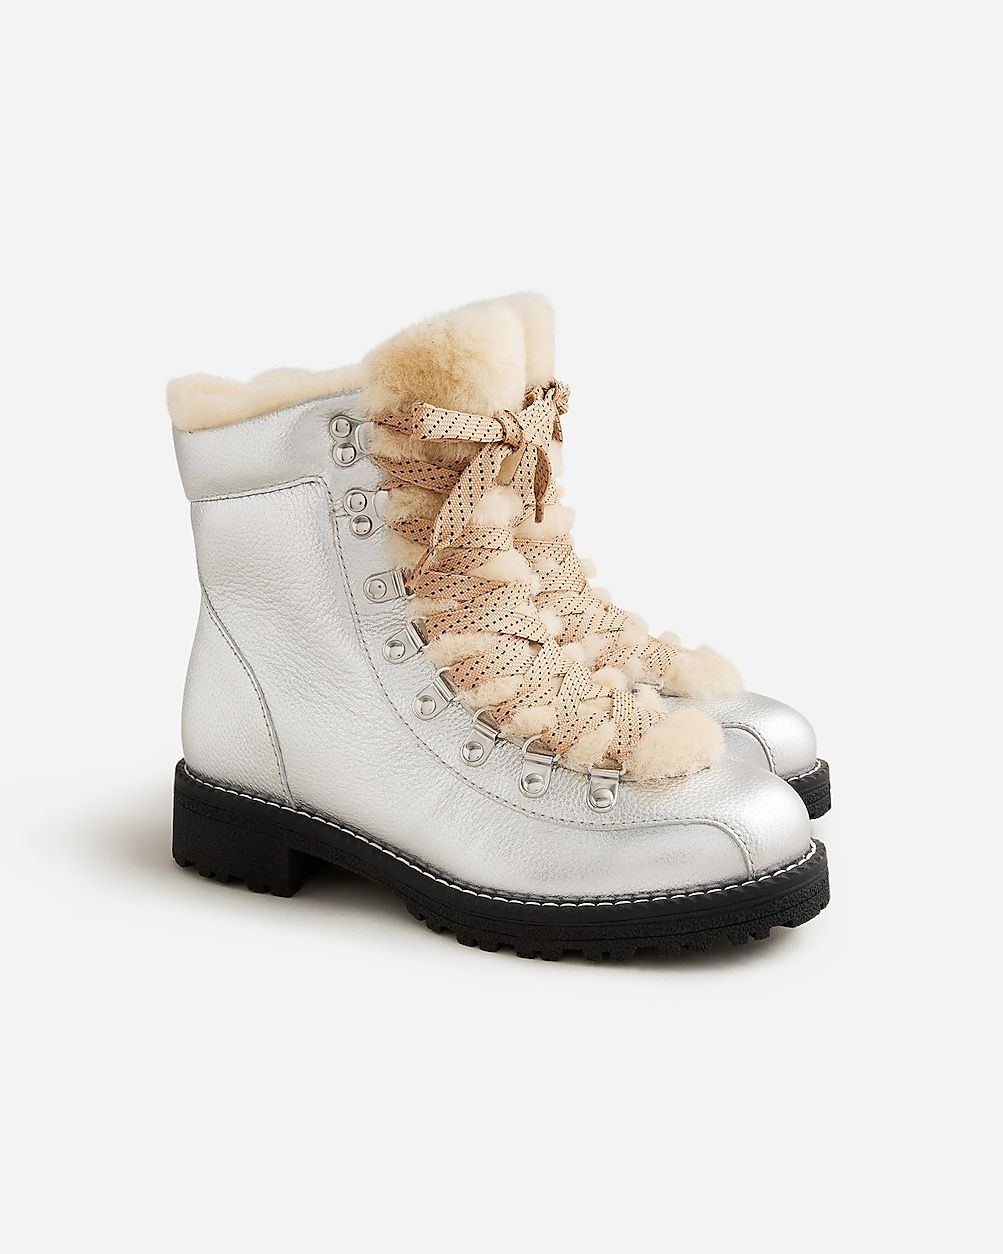 New Nordic boots in metallic leather and nubuck | J.Crew US